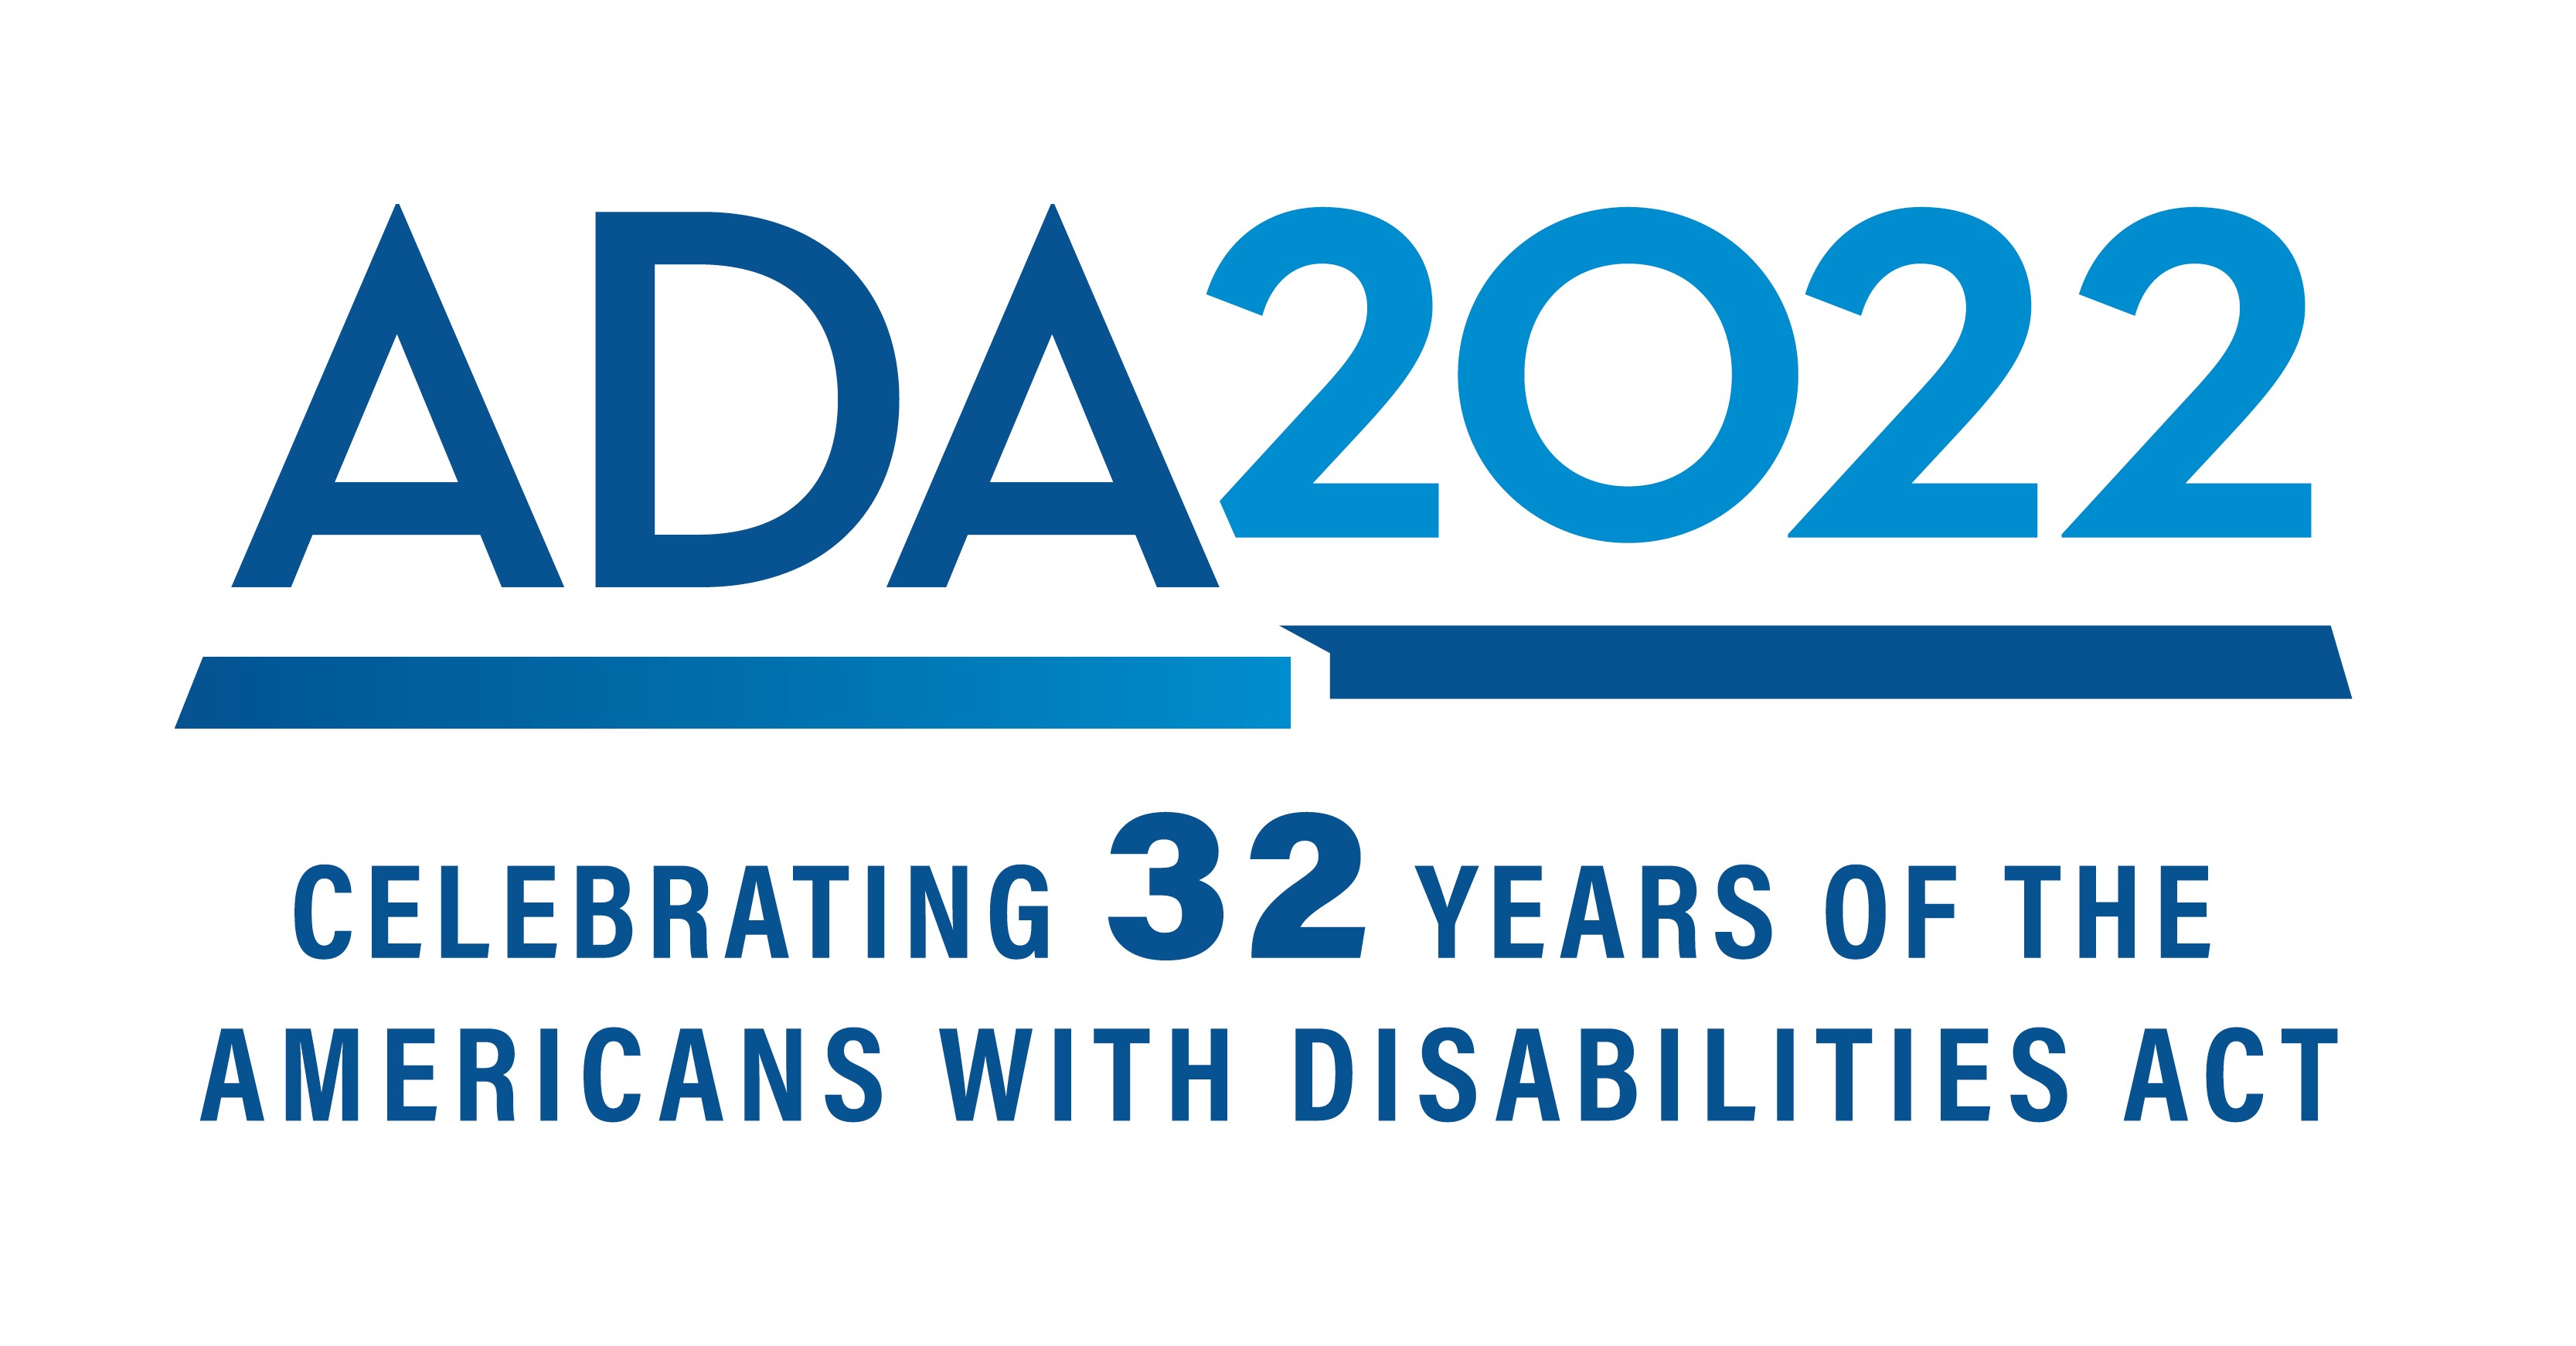 ADA 2022: Celebrating 32 years of the American with Disabilities Act.